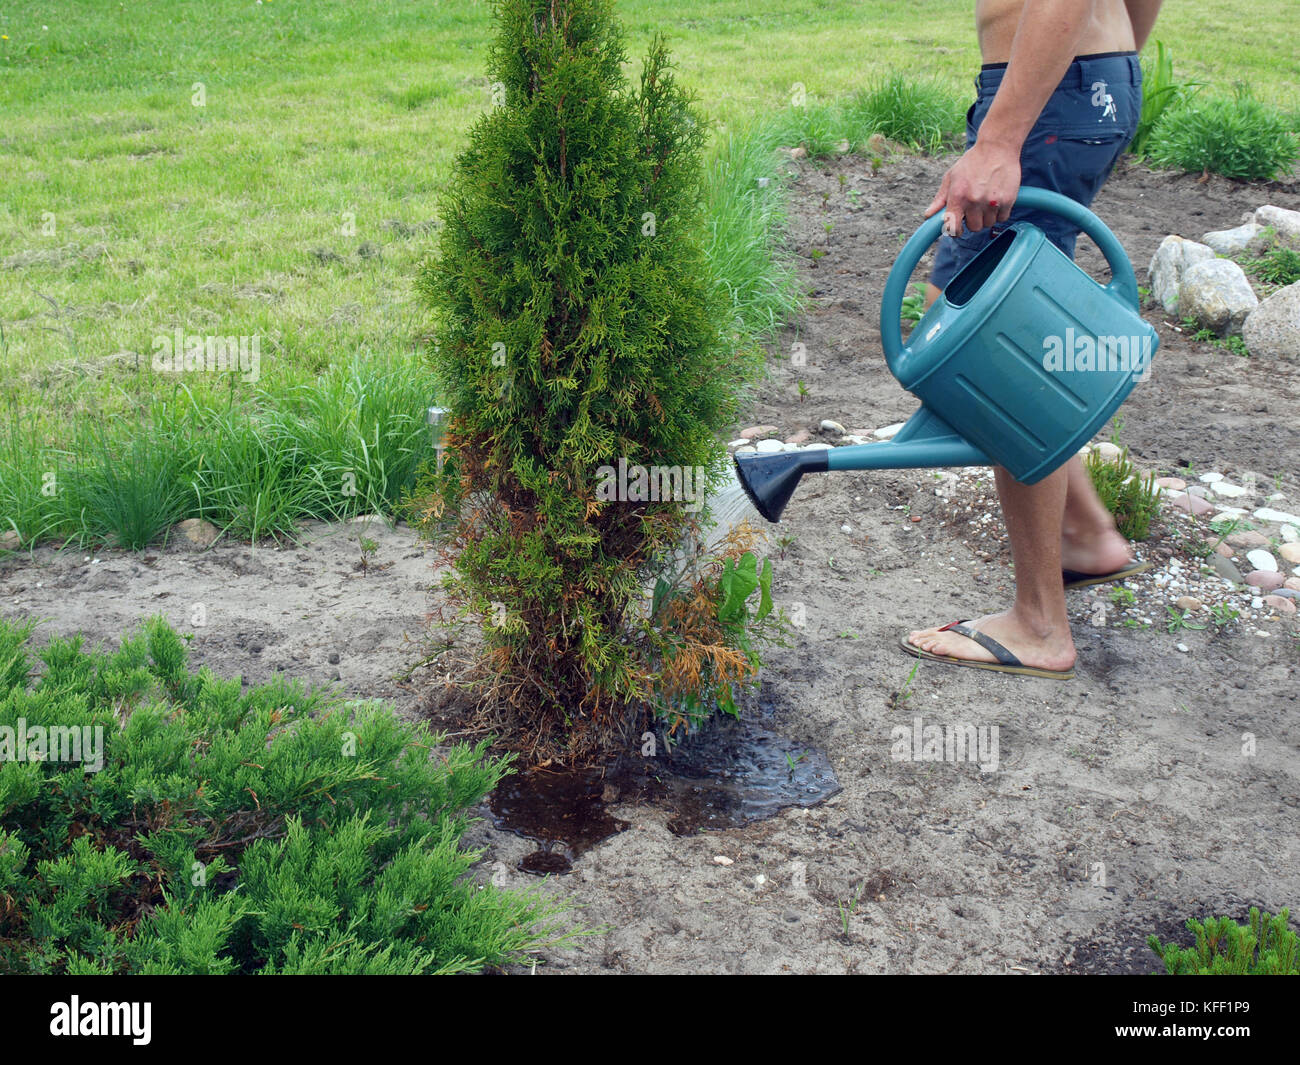 Watering young thuja plant by watering can Stock Photo